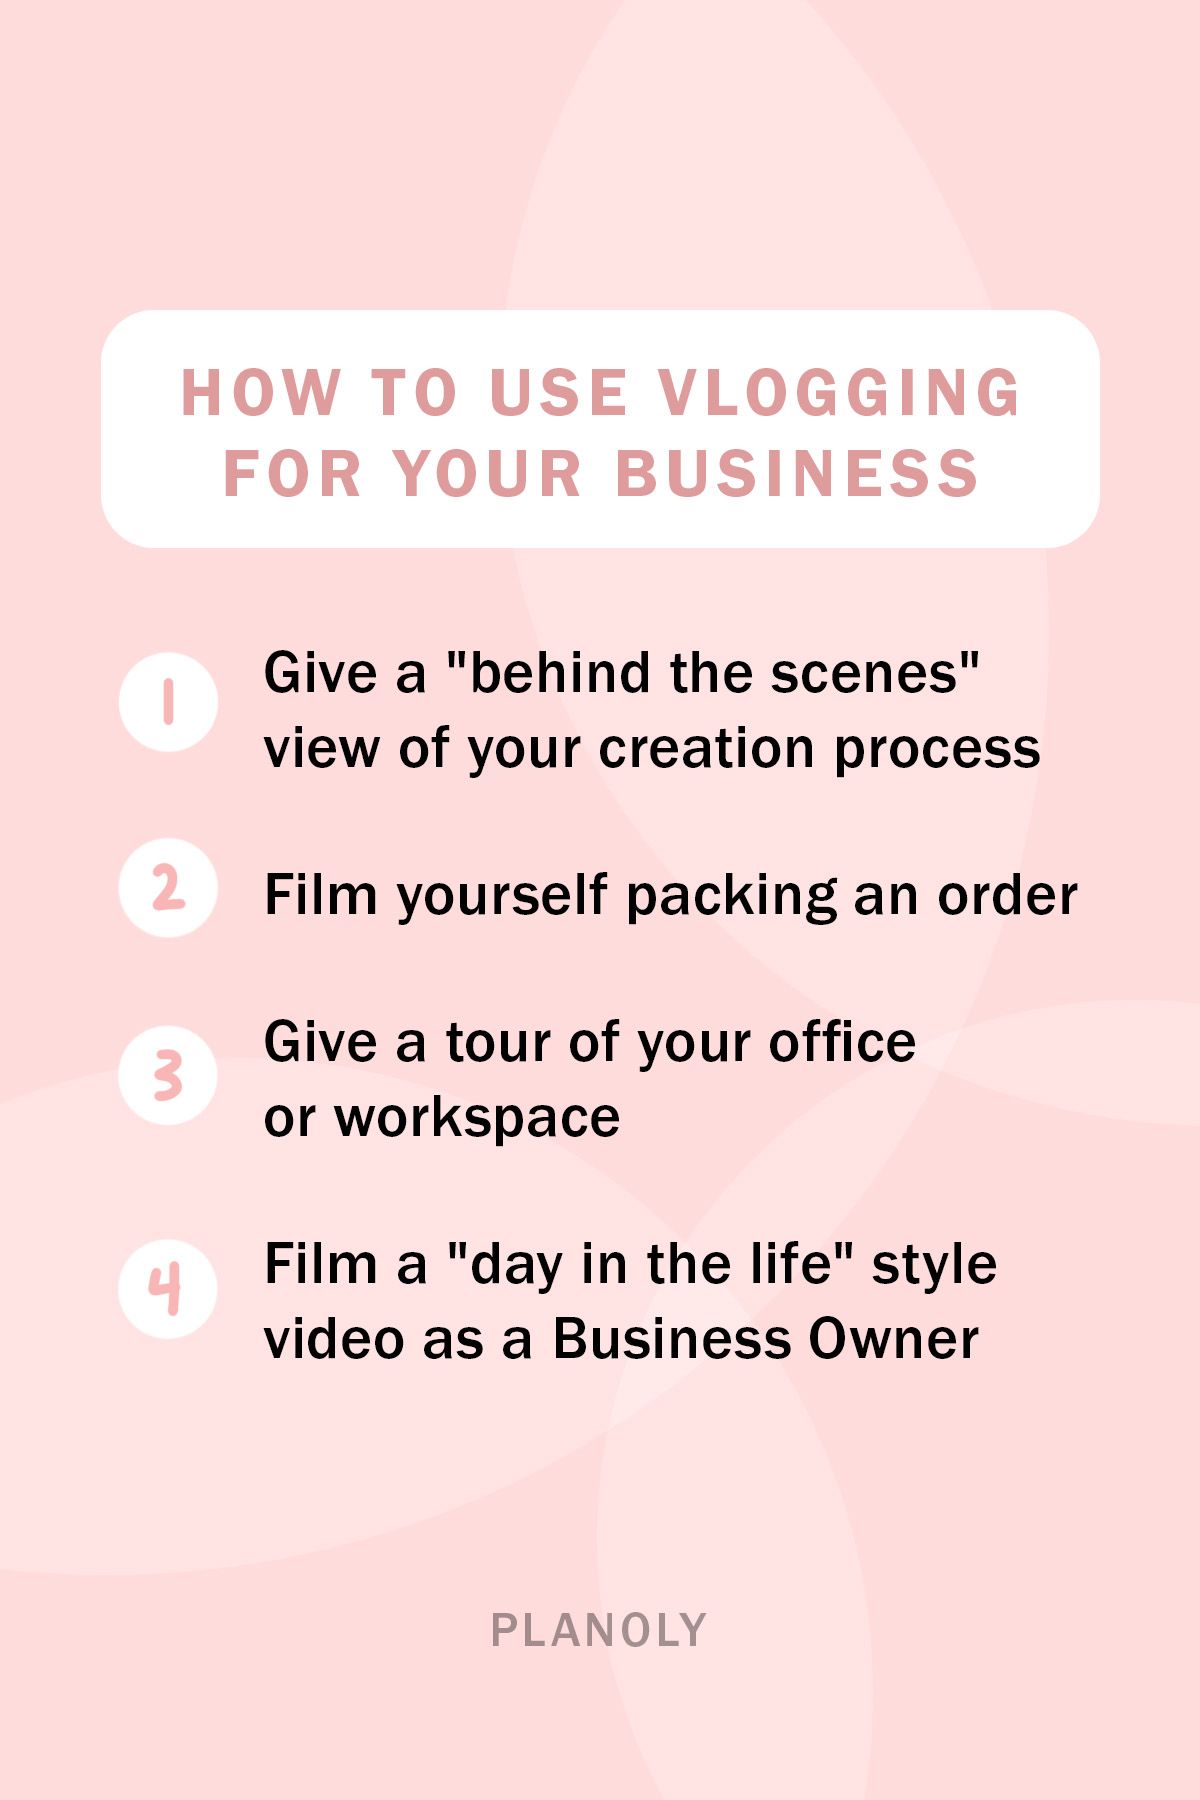 PLANOLY - Blog - Vlogging Style Video Content for Social Media - Vertical Image